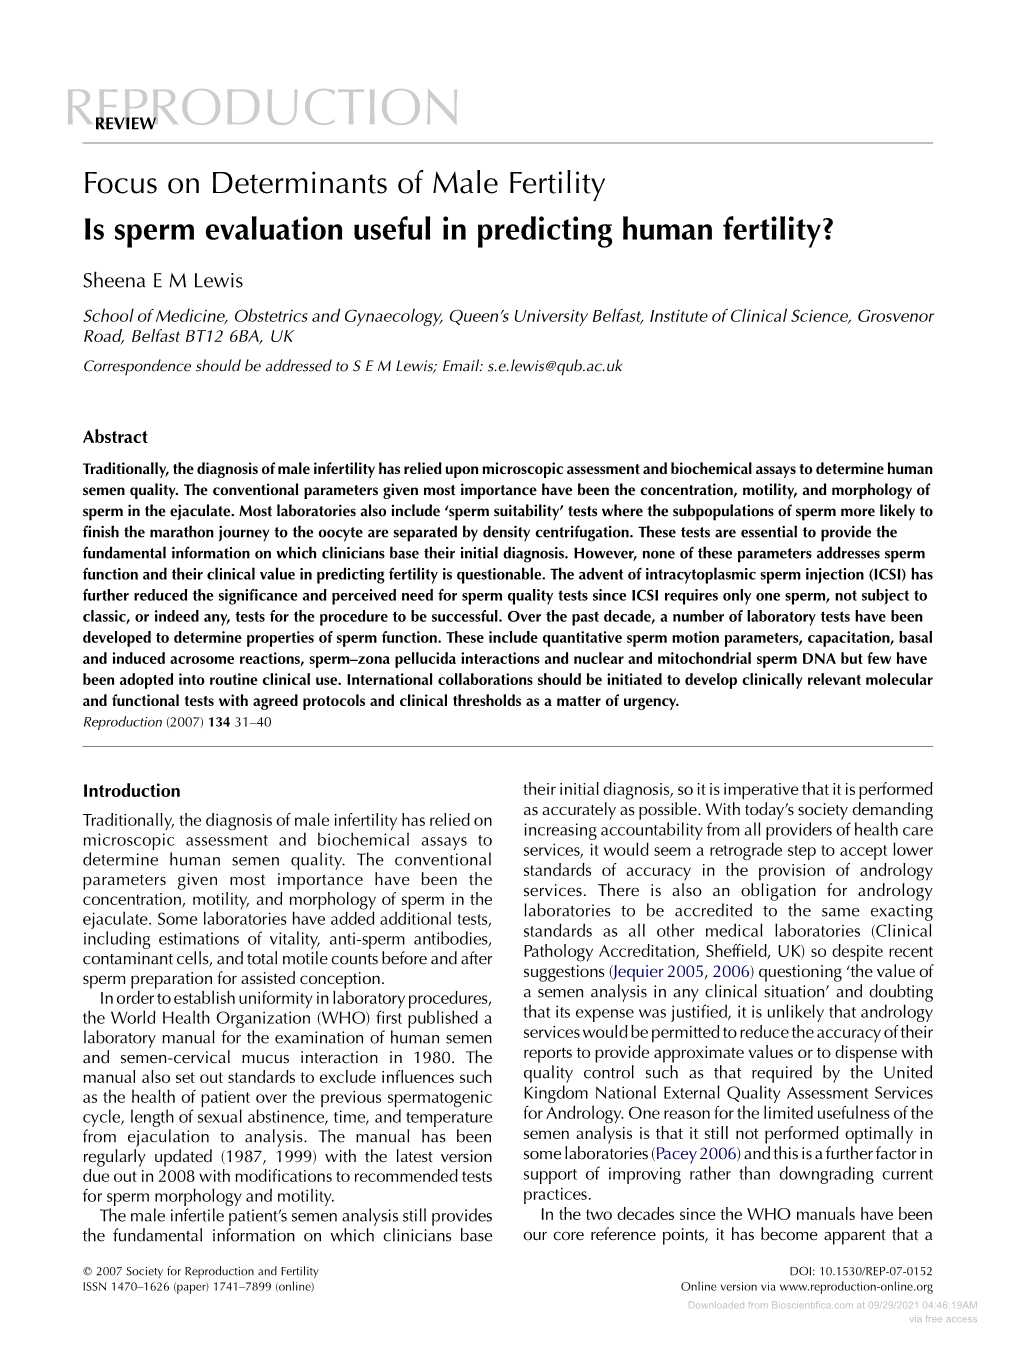 Is Sperm Evaluation Useful in Predicting Human Fertility?